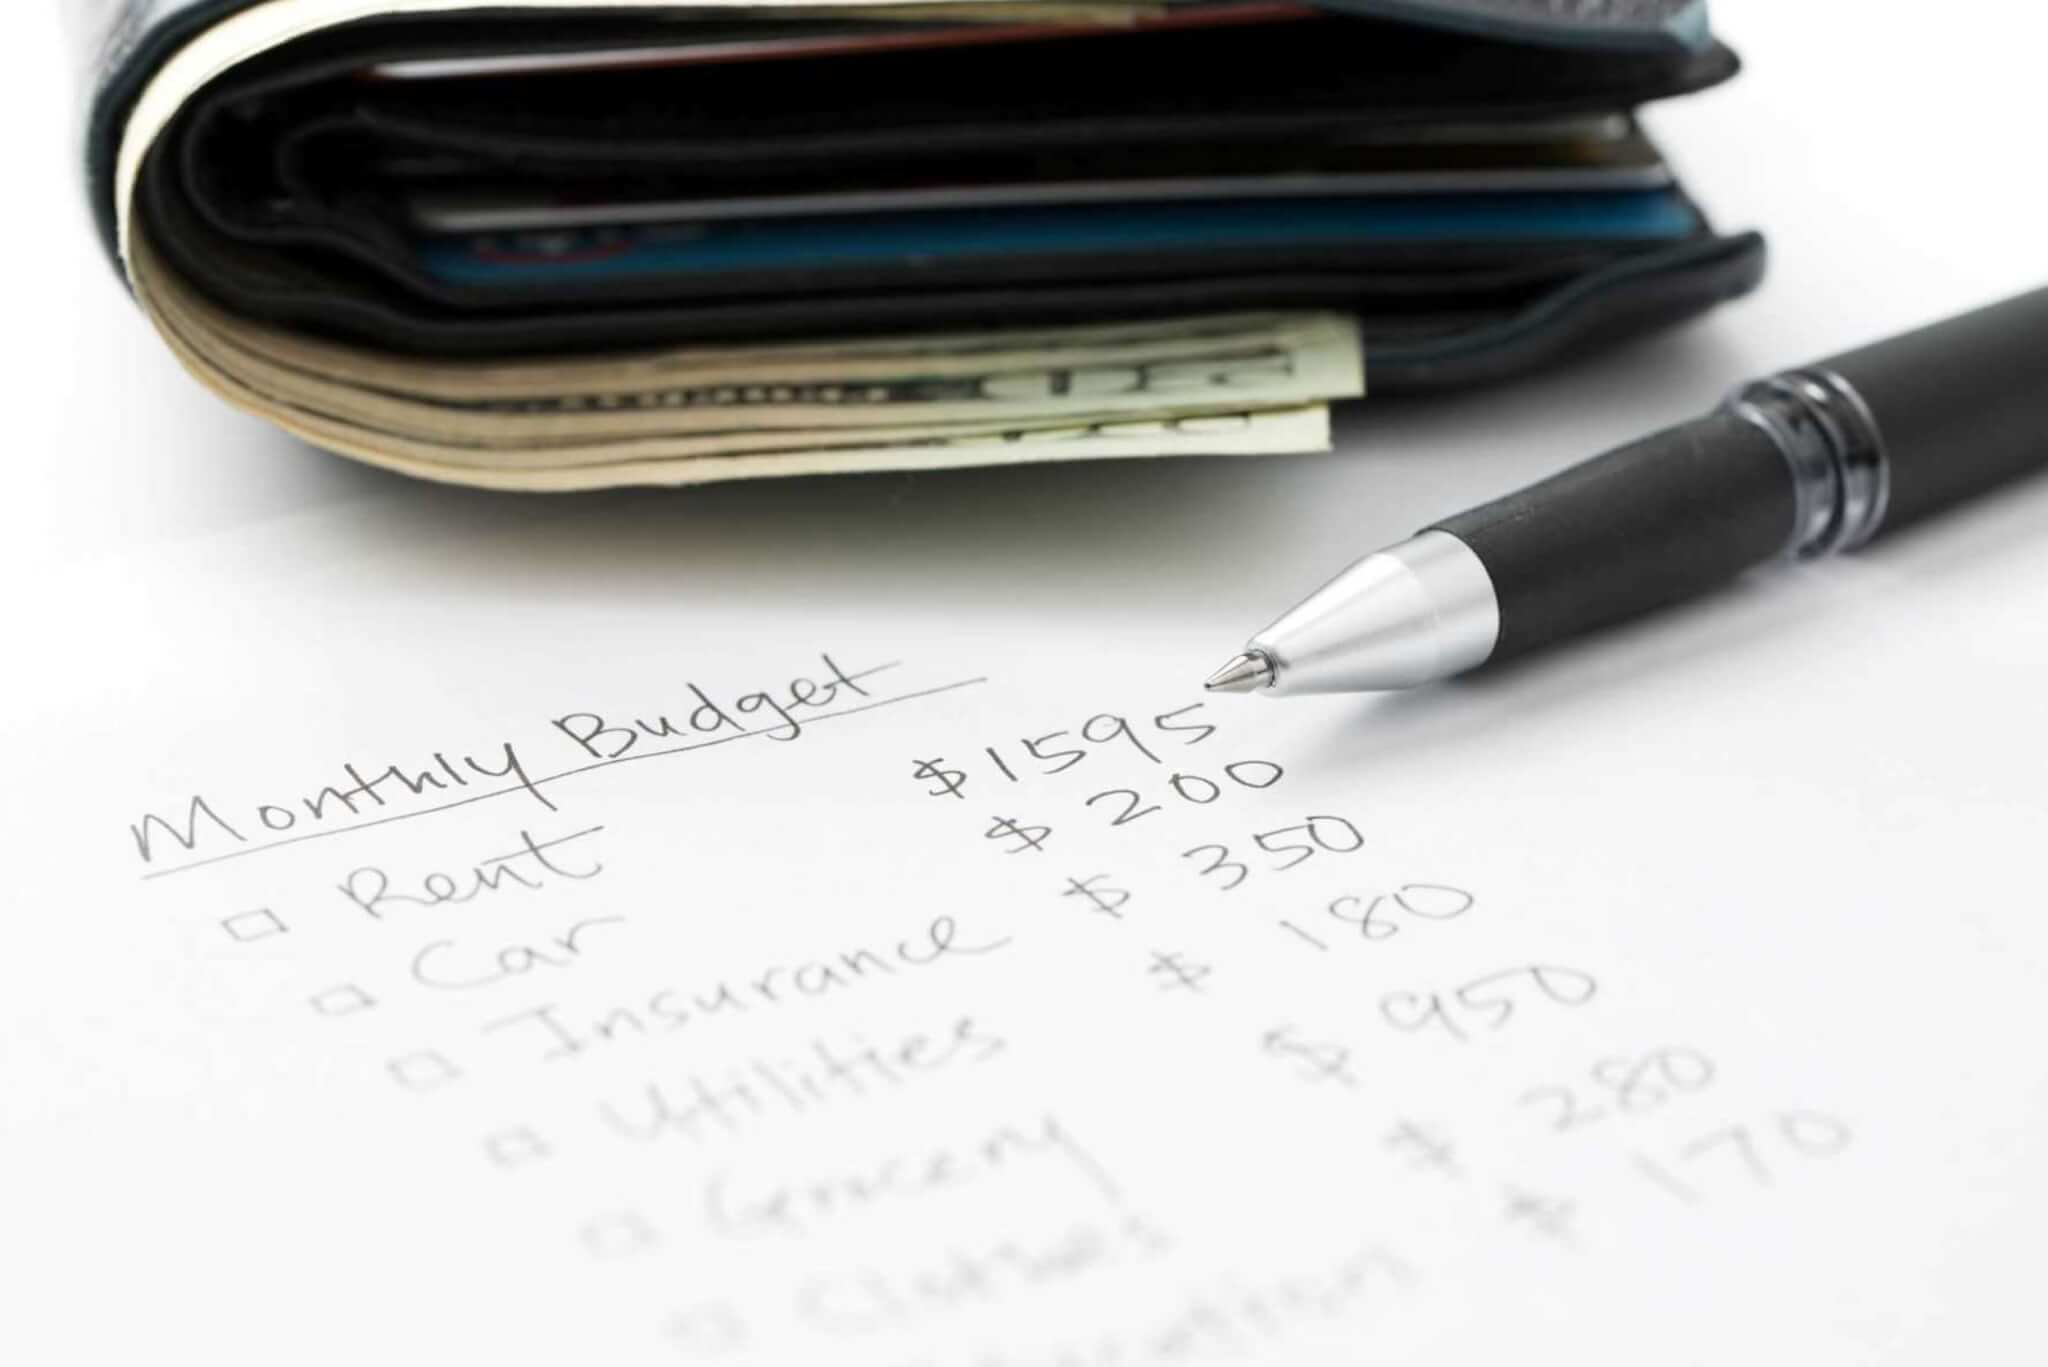 budgeting tips for beginners